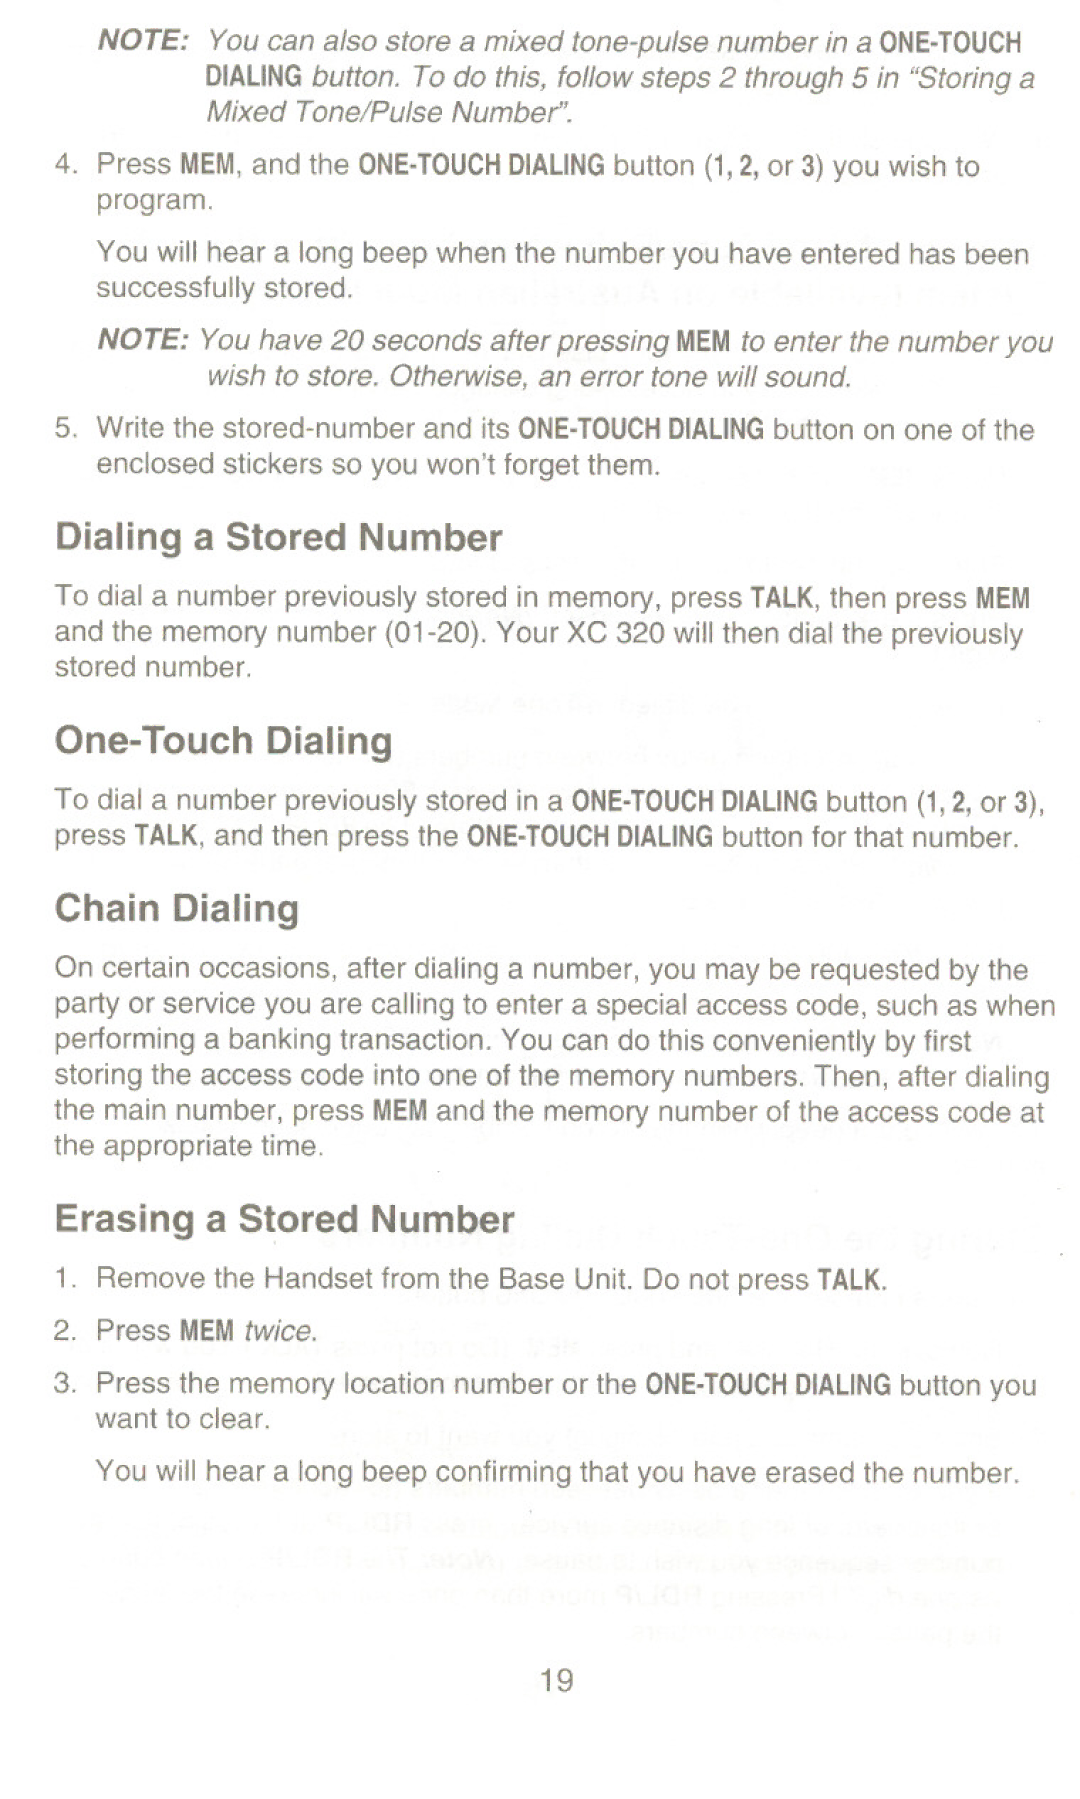 Uniden XC 320 manual Dialing a Stored Number, One-Touch Dialing, Erasing a Stored Number, Chain Dialing 